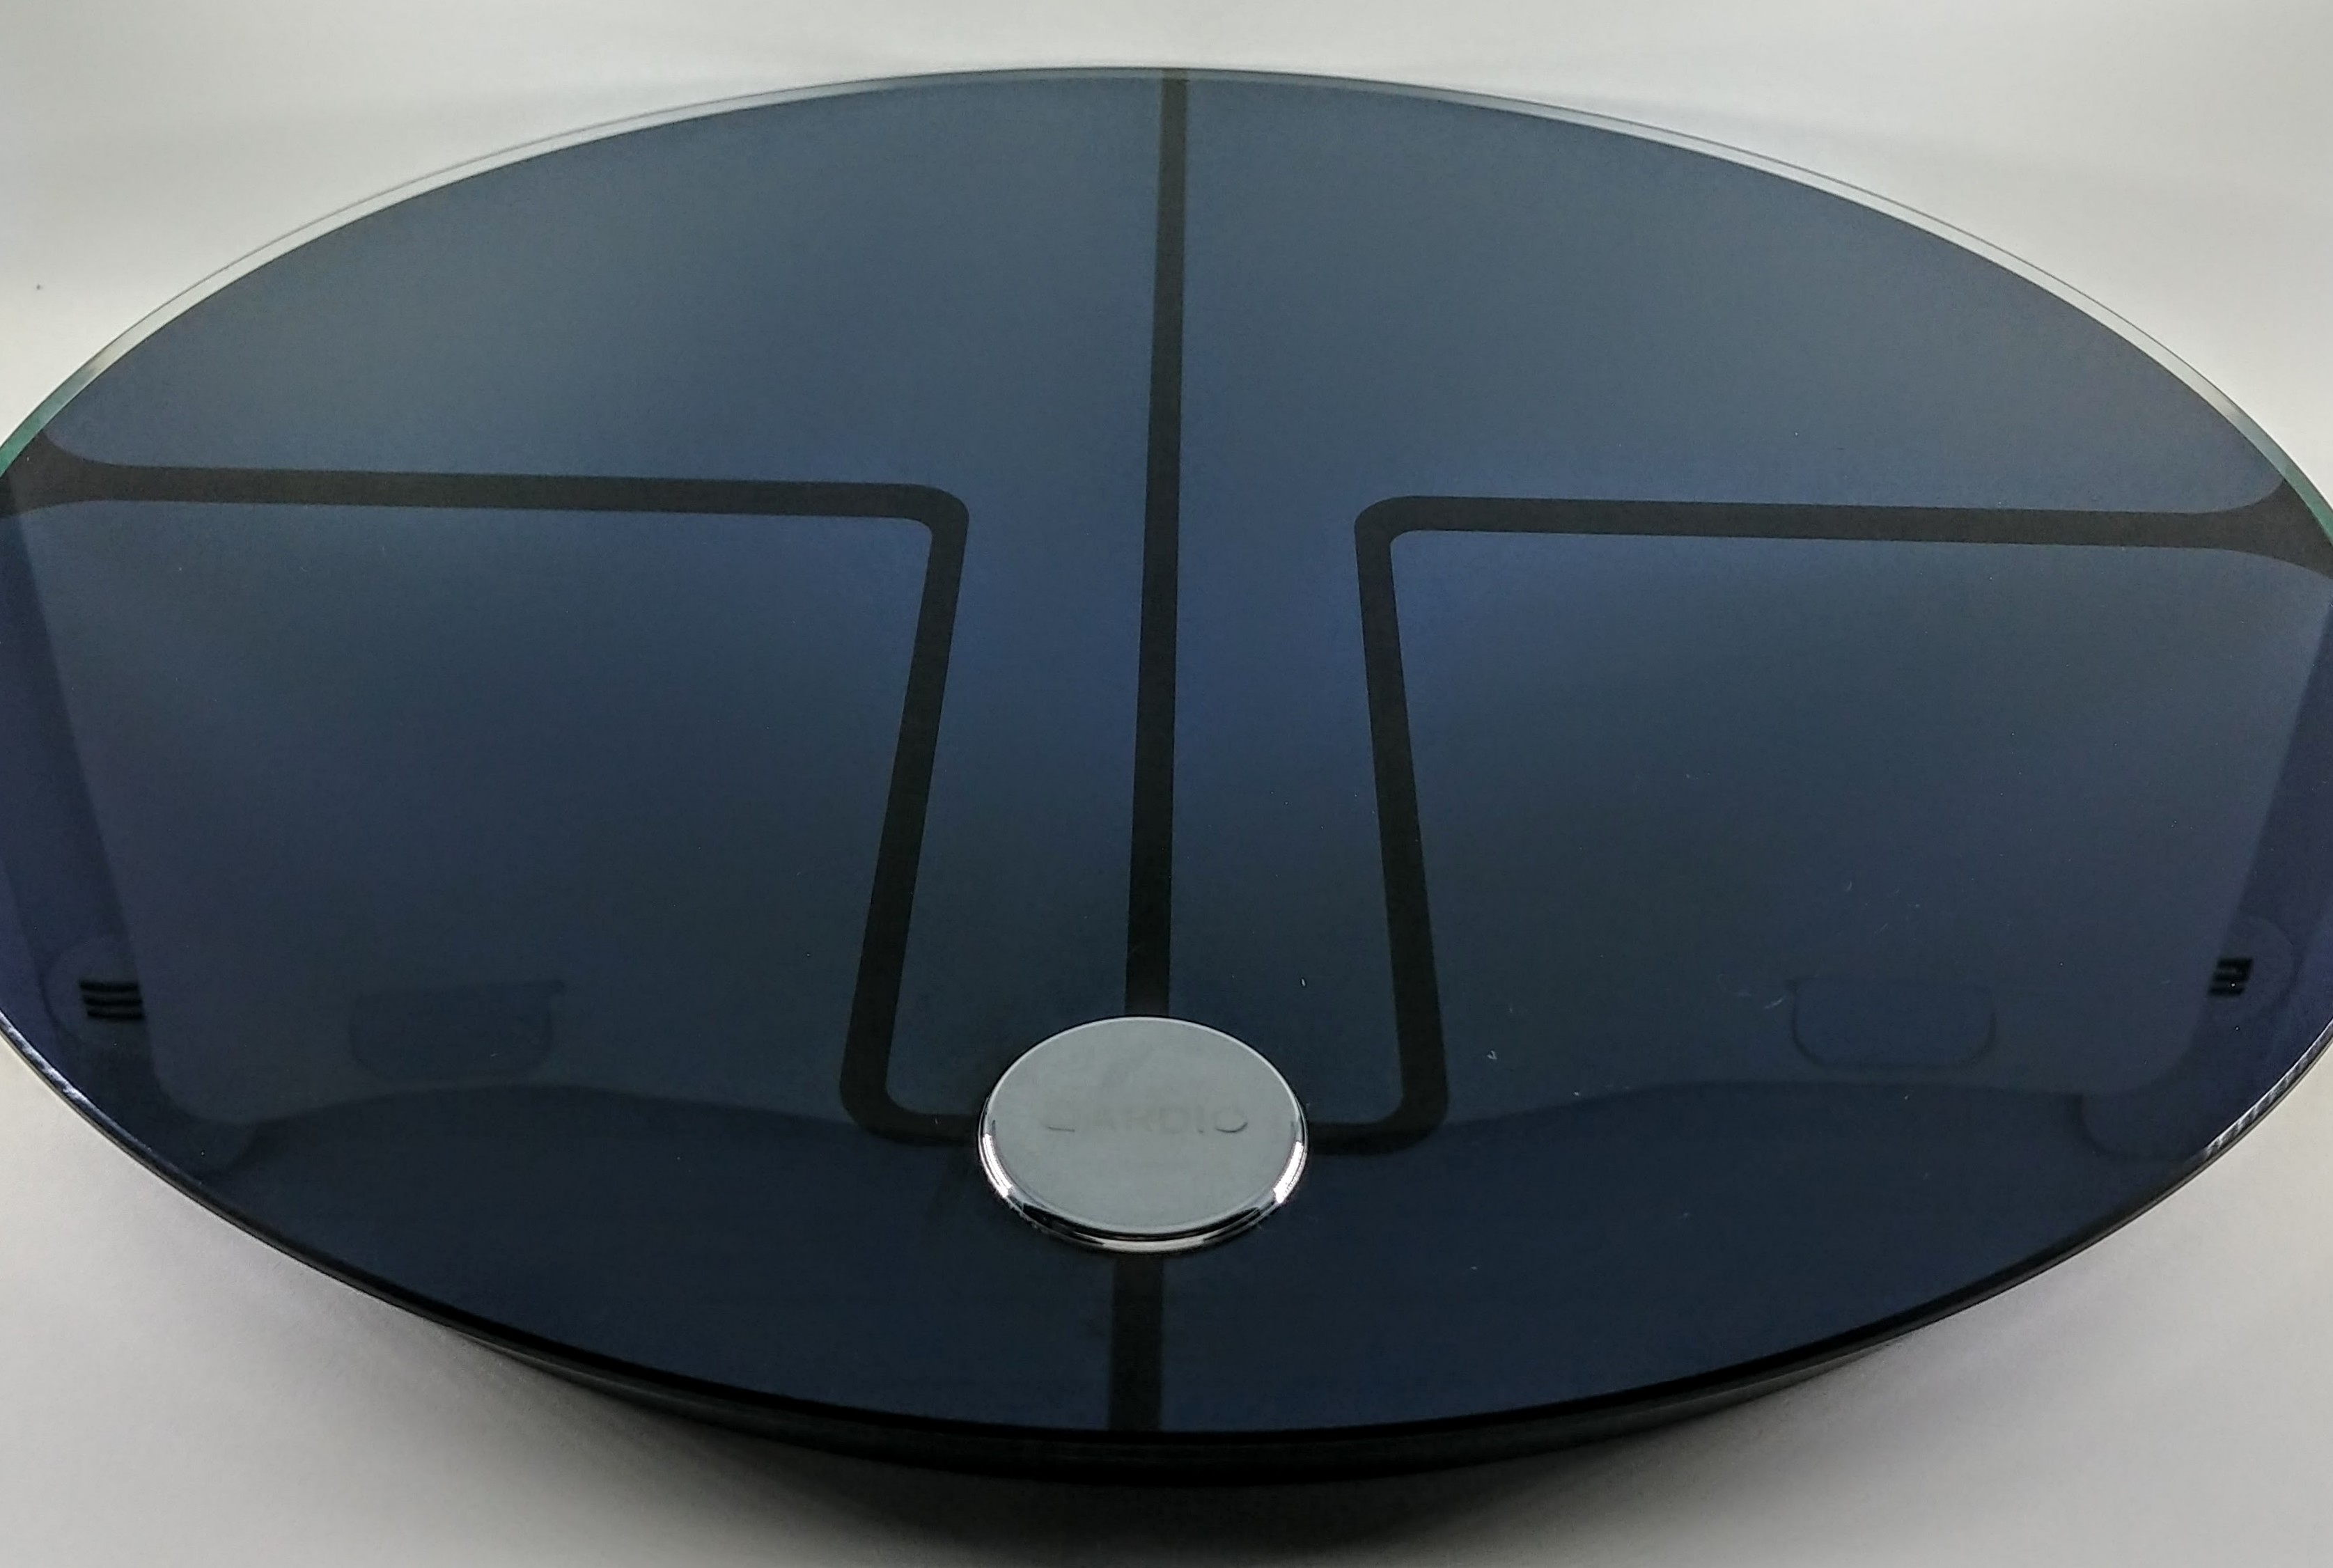 QardioBase 2 - a pricey but top-tier smart scale (Review)